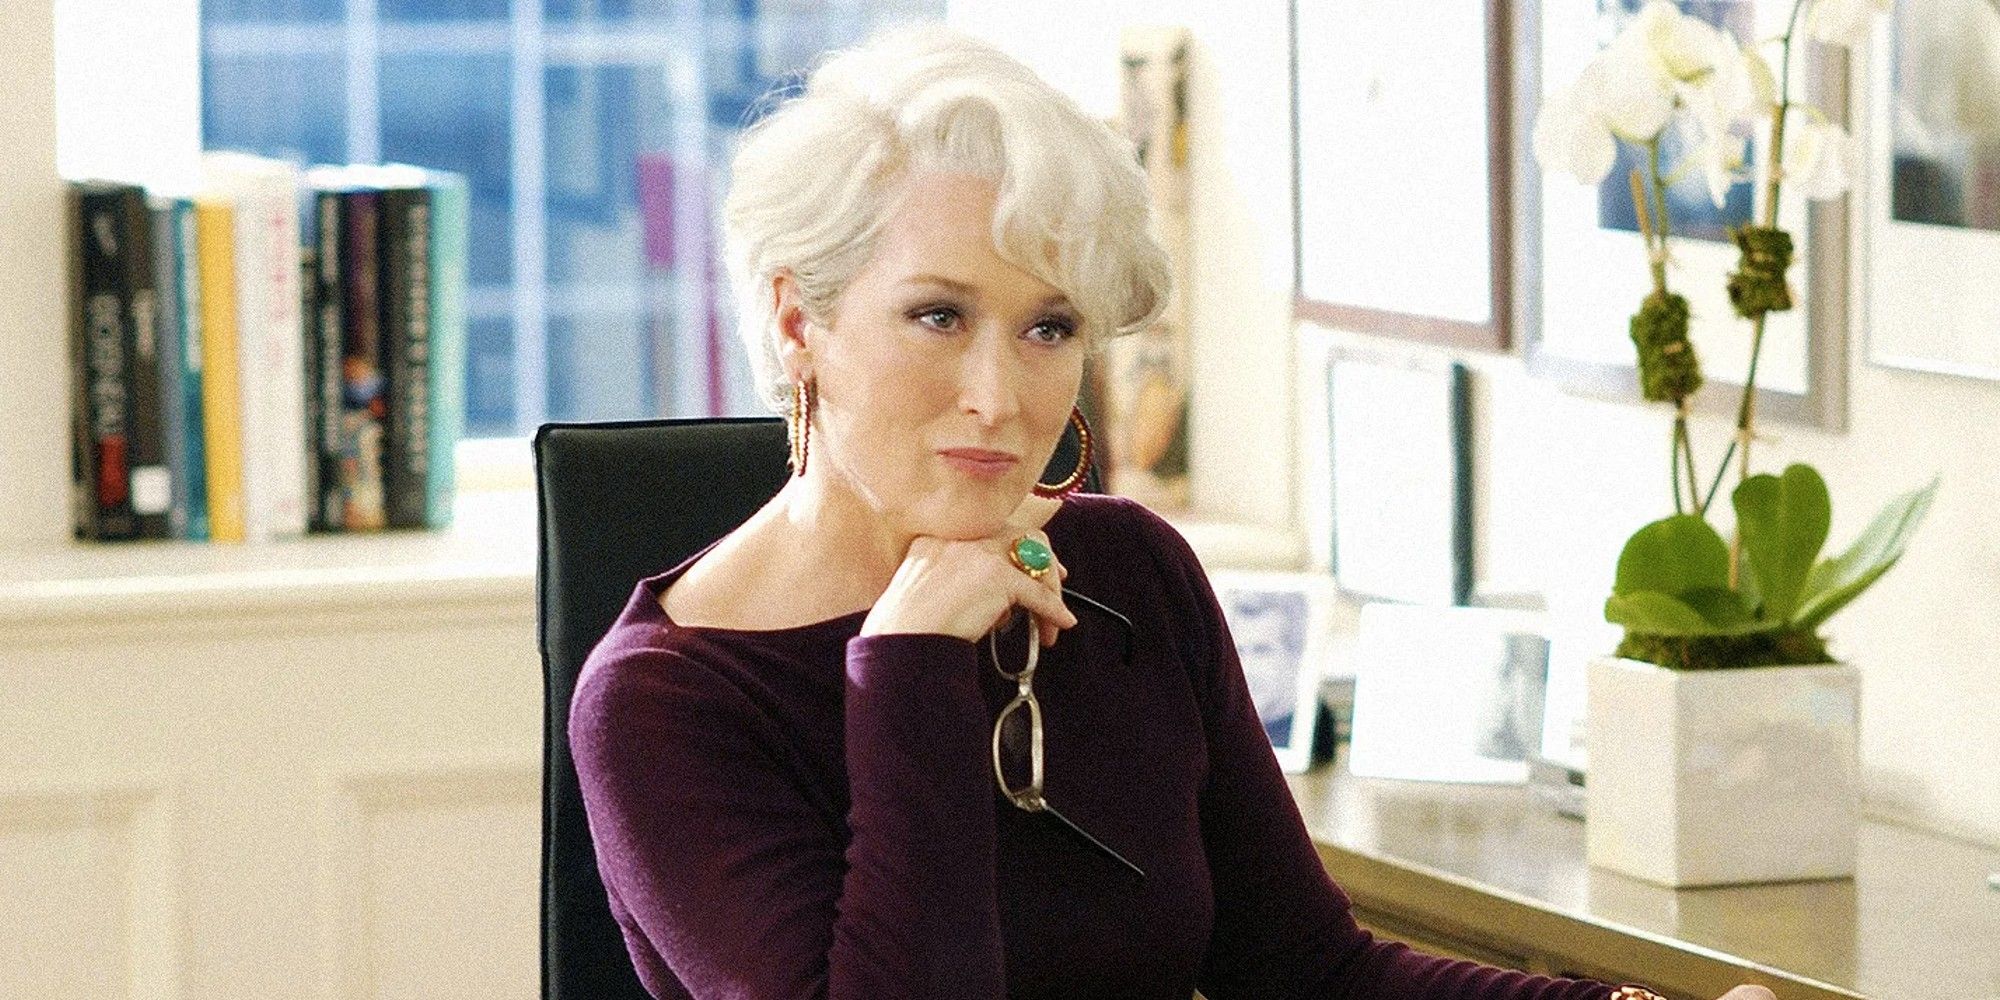 Miranda looking intently at something off-camera while at her office in The Devil Wears Prada.